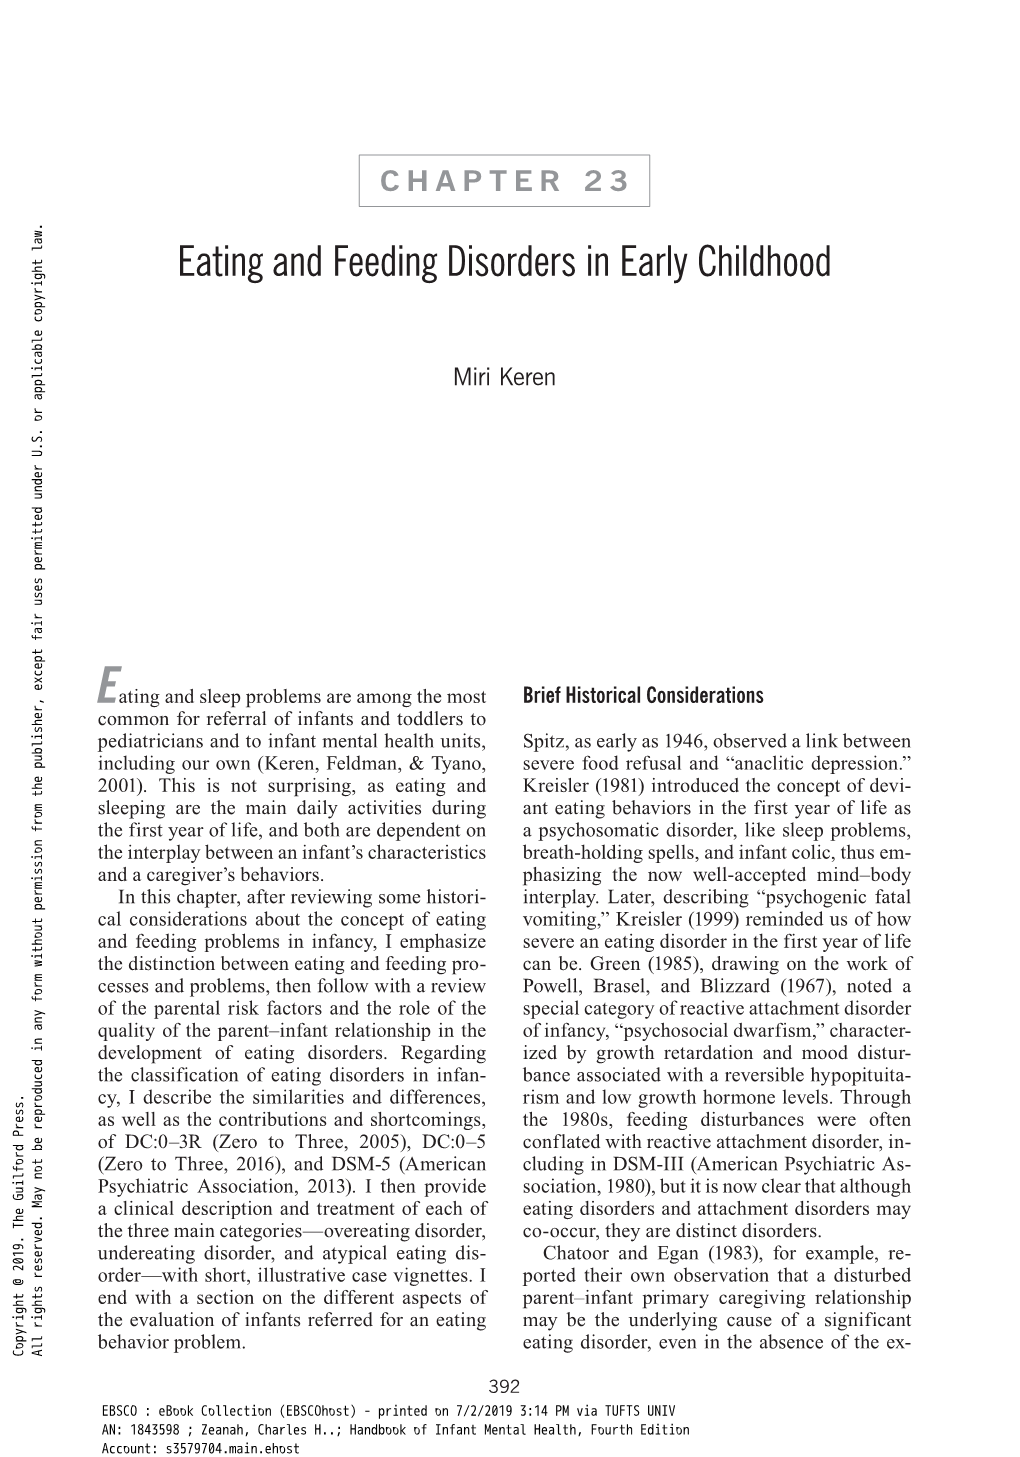 Eating and Feeding Disorders in Early Childhood